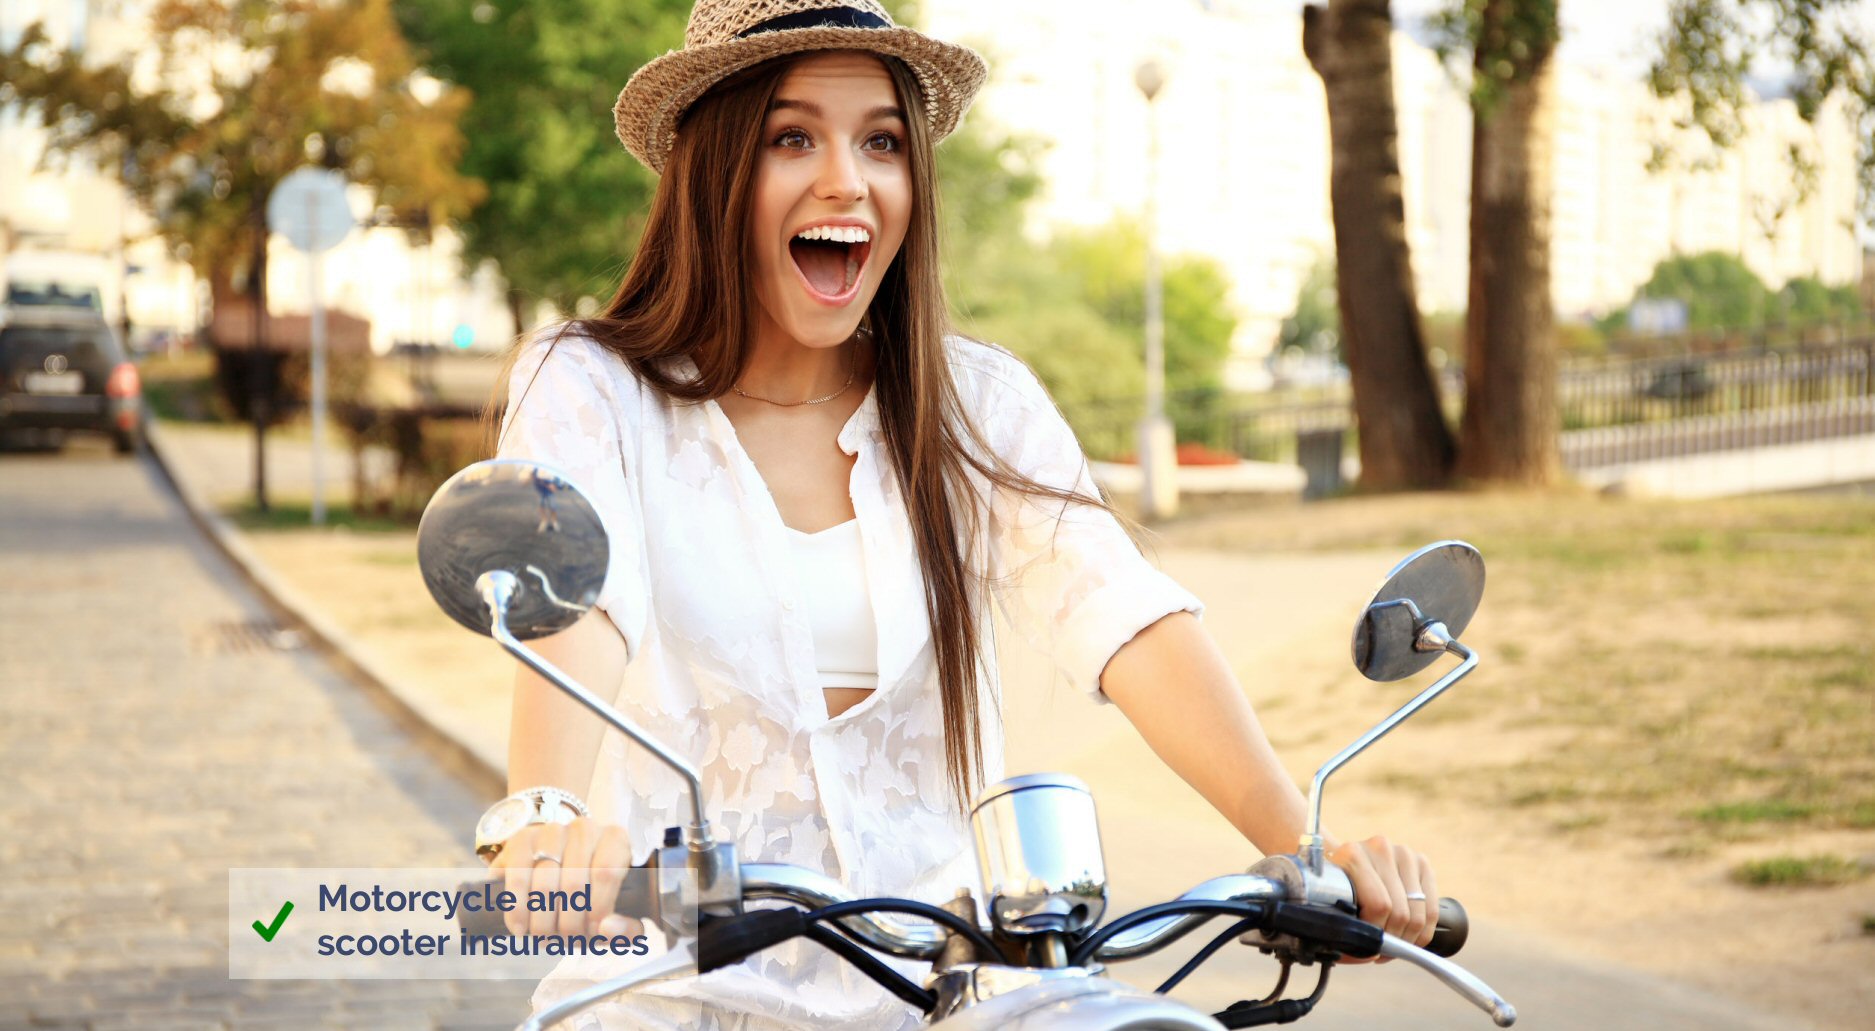 Scooter and motor insurances in Spain